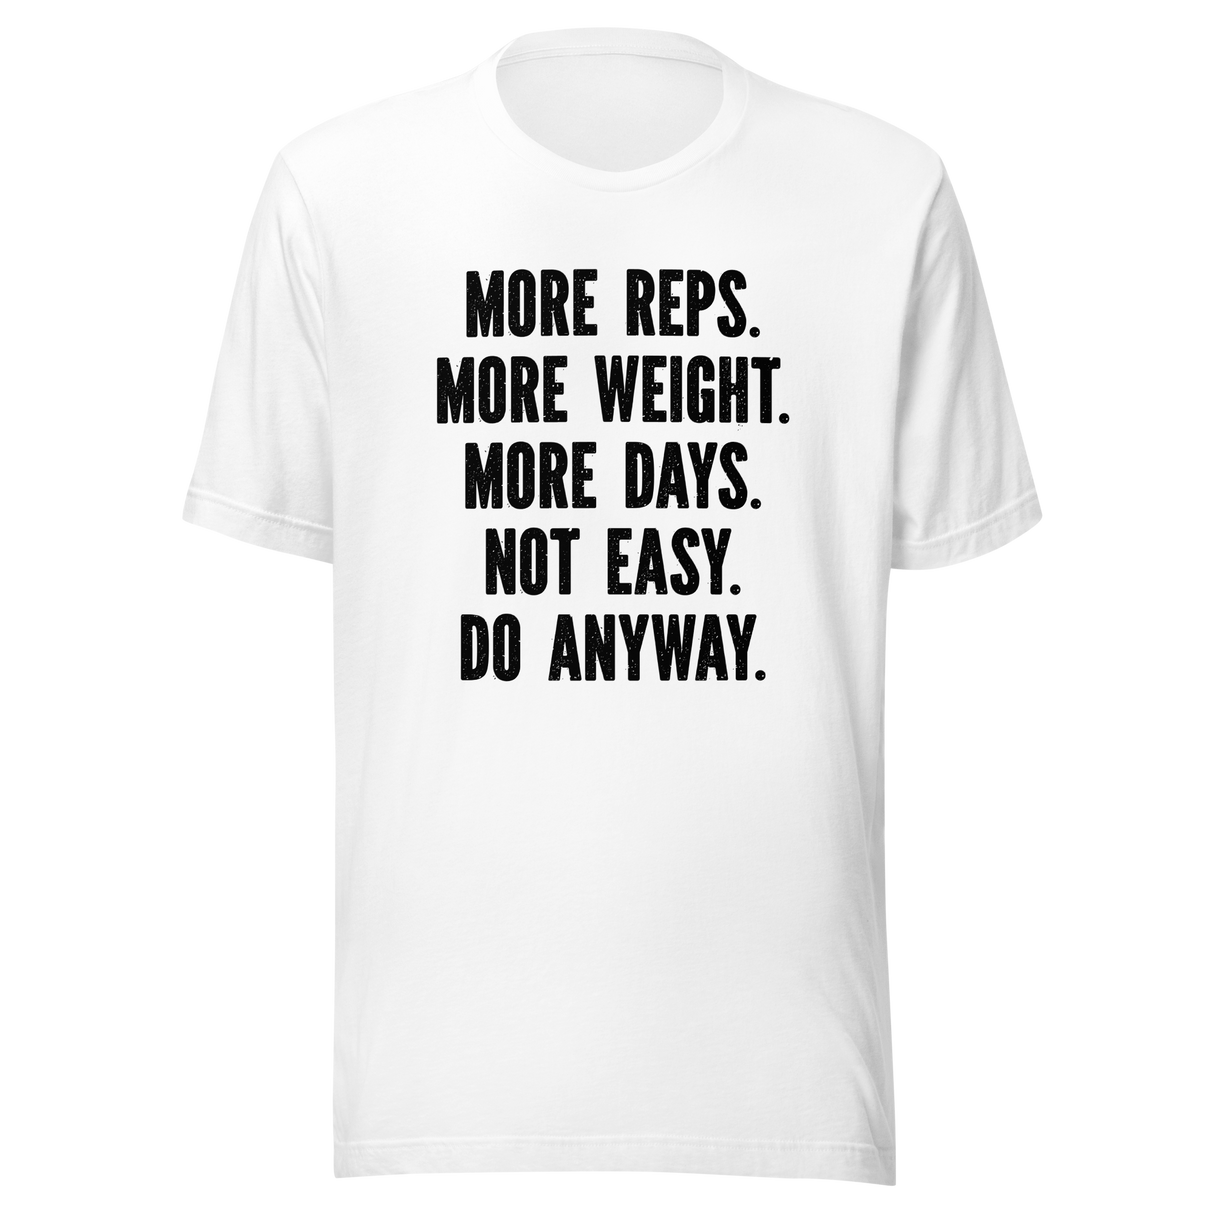 more-reps-more-weight-more-days-not-easy-do-anyway-gym-tee-more-t-shirt-reps-tee-gym-t-shirt-workout-tee#color_white